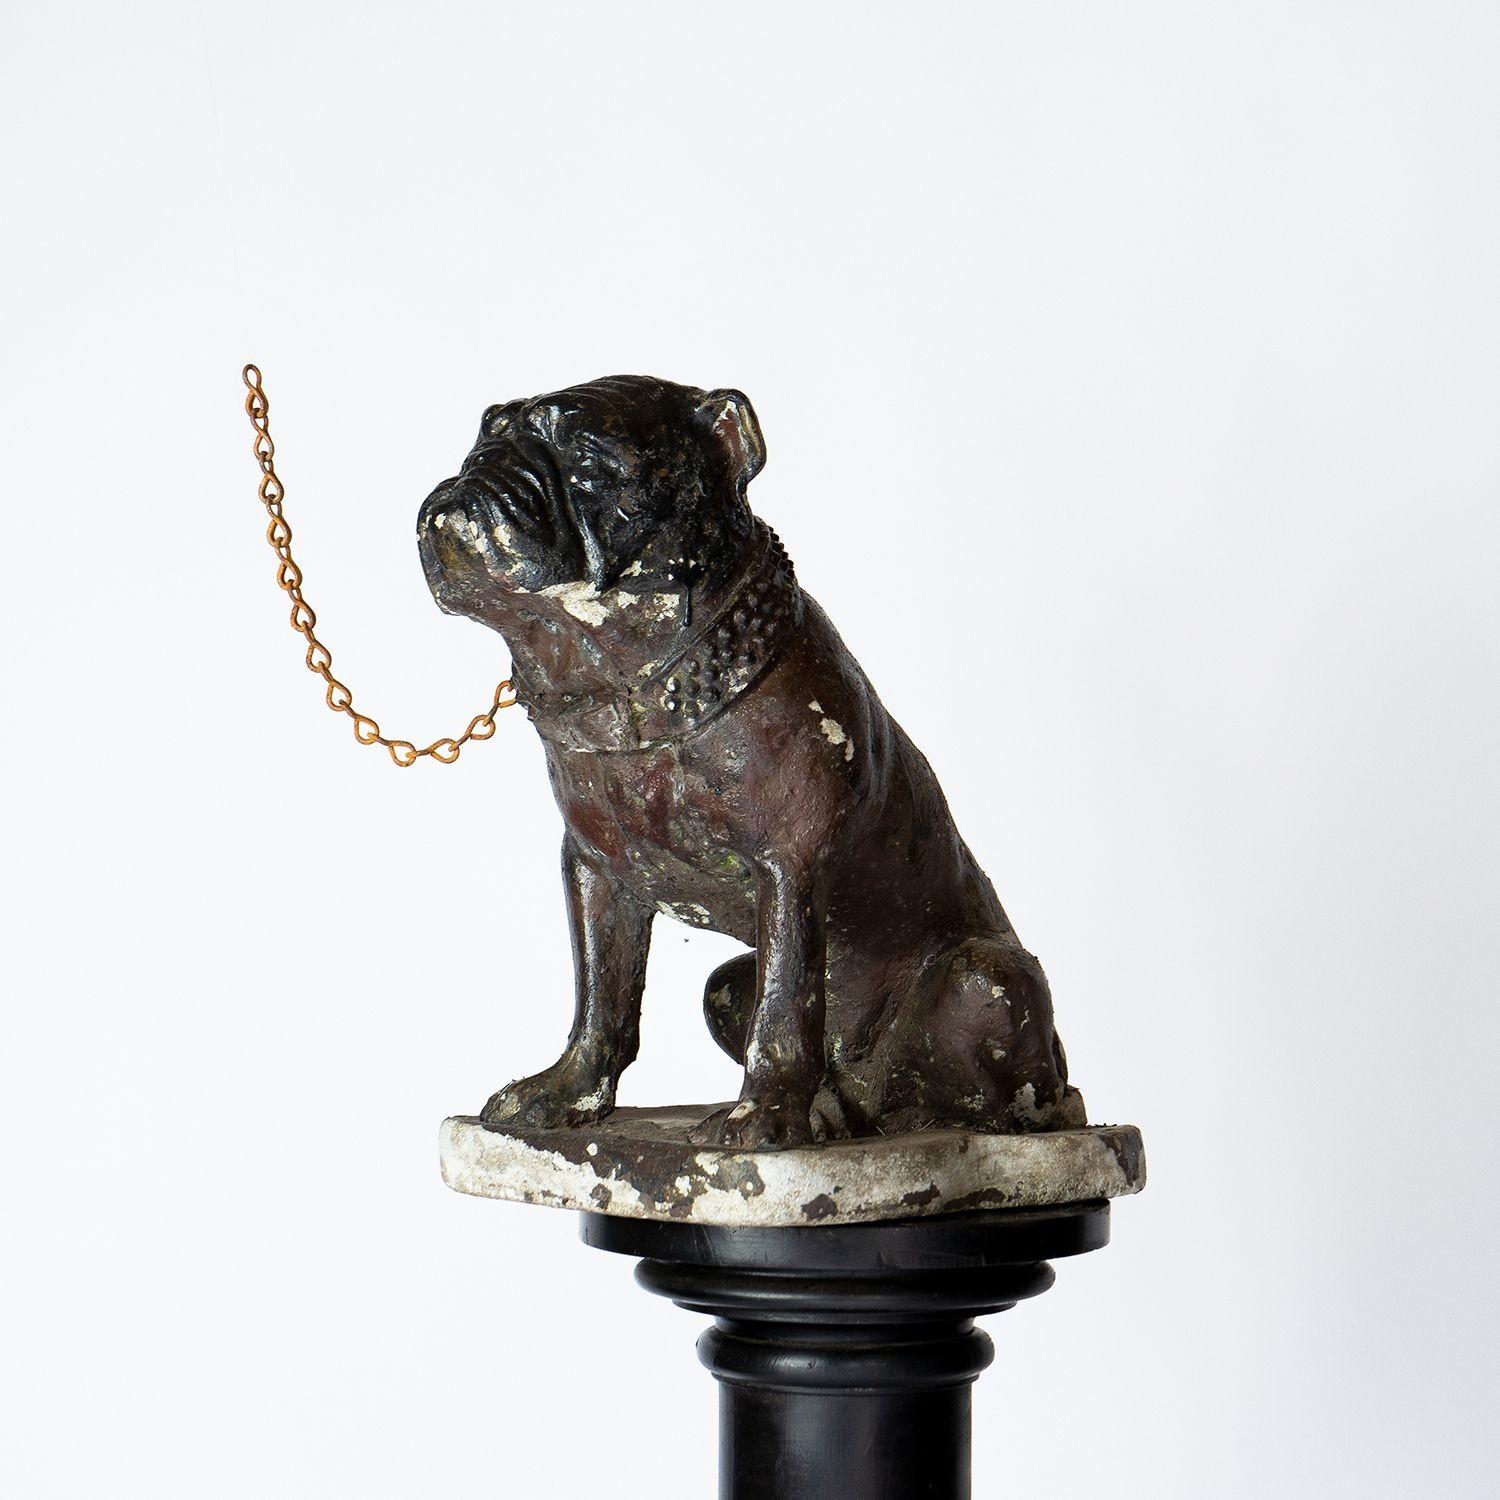 Hand-Painted Vintage Reconstituted Stone English Bulldog Garden Statue Figure c. 1920s For Sale